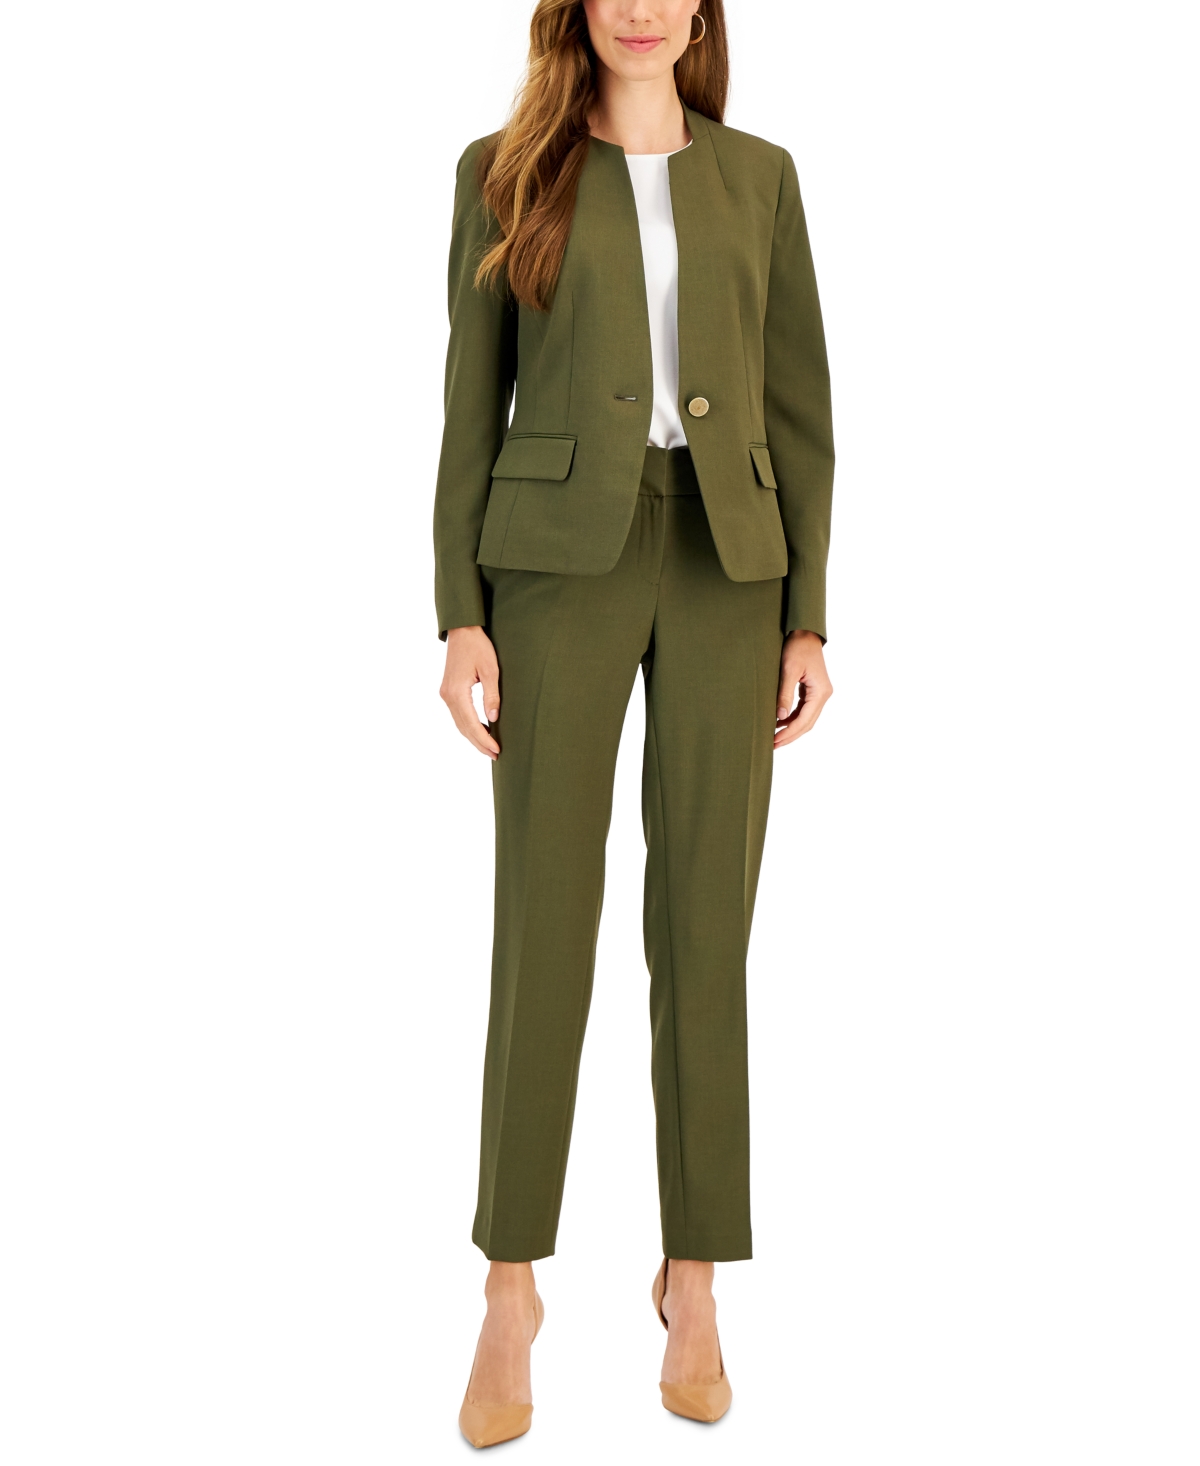 Le Suit Single-button Blazer And Slim-fit Pantsuit, Regular And Petite Sizes In Plum